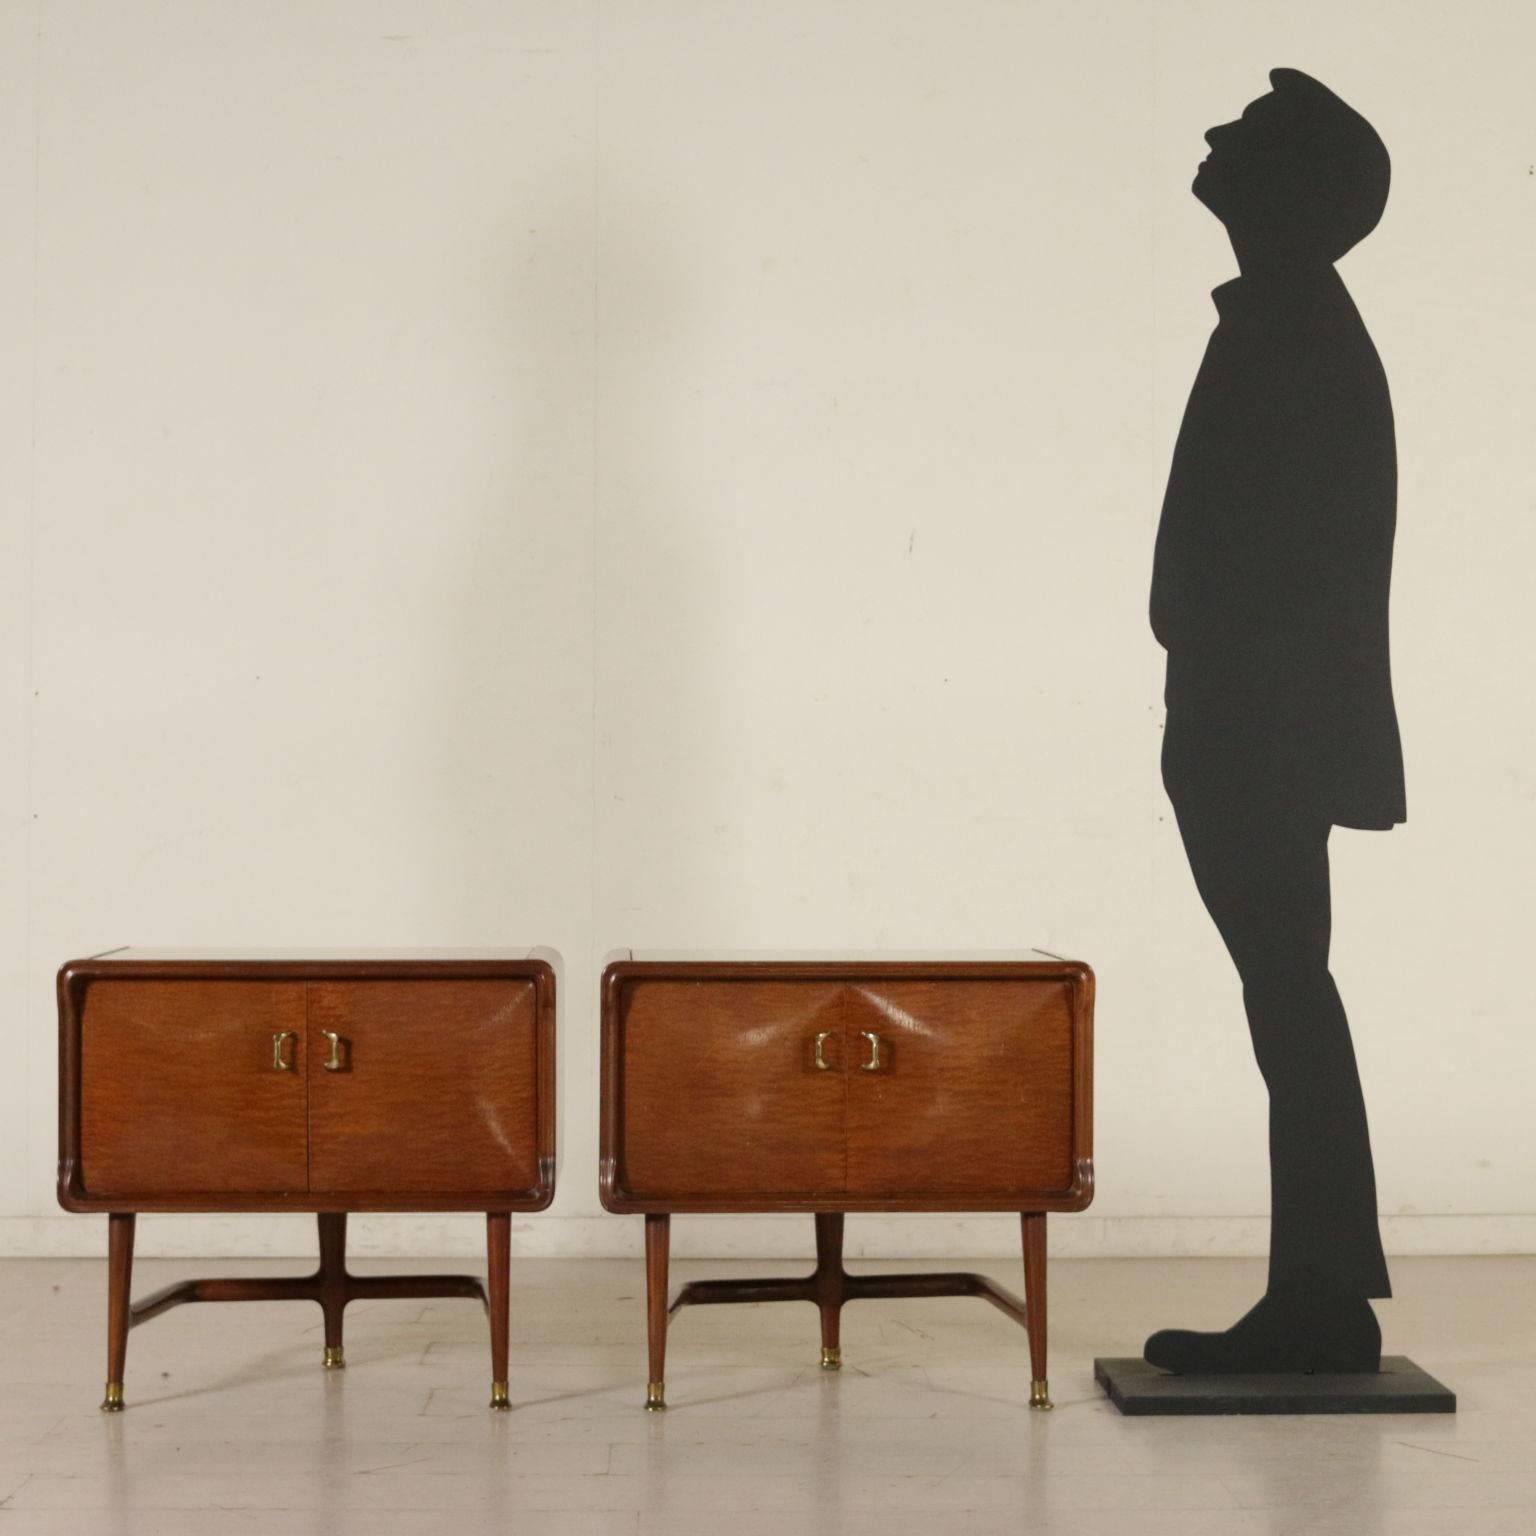 A pair of nightstands, brier veneer, retro treated glass. Manufactured in Italy, 1950s.